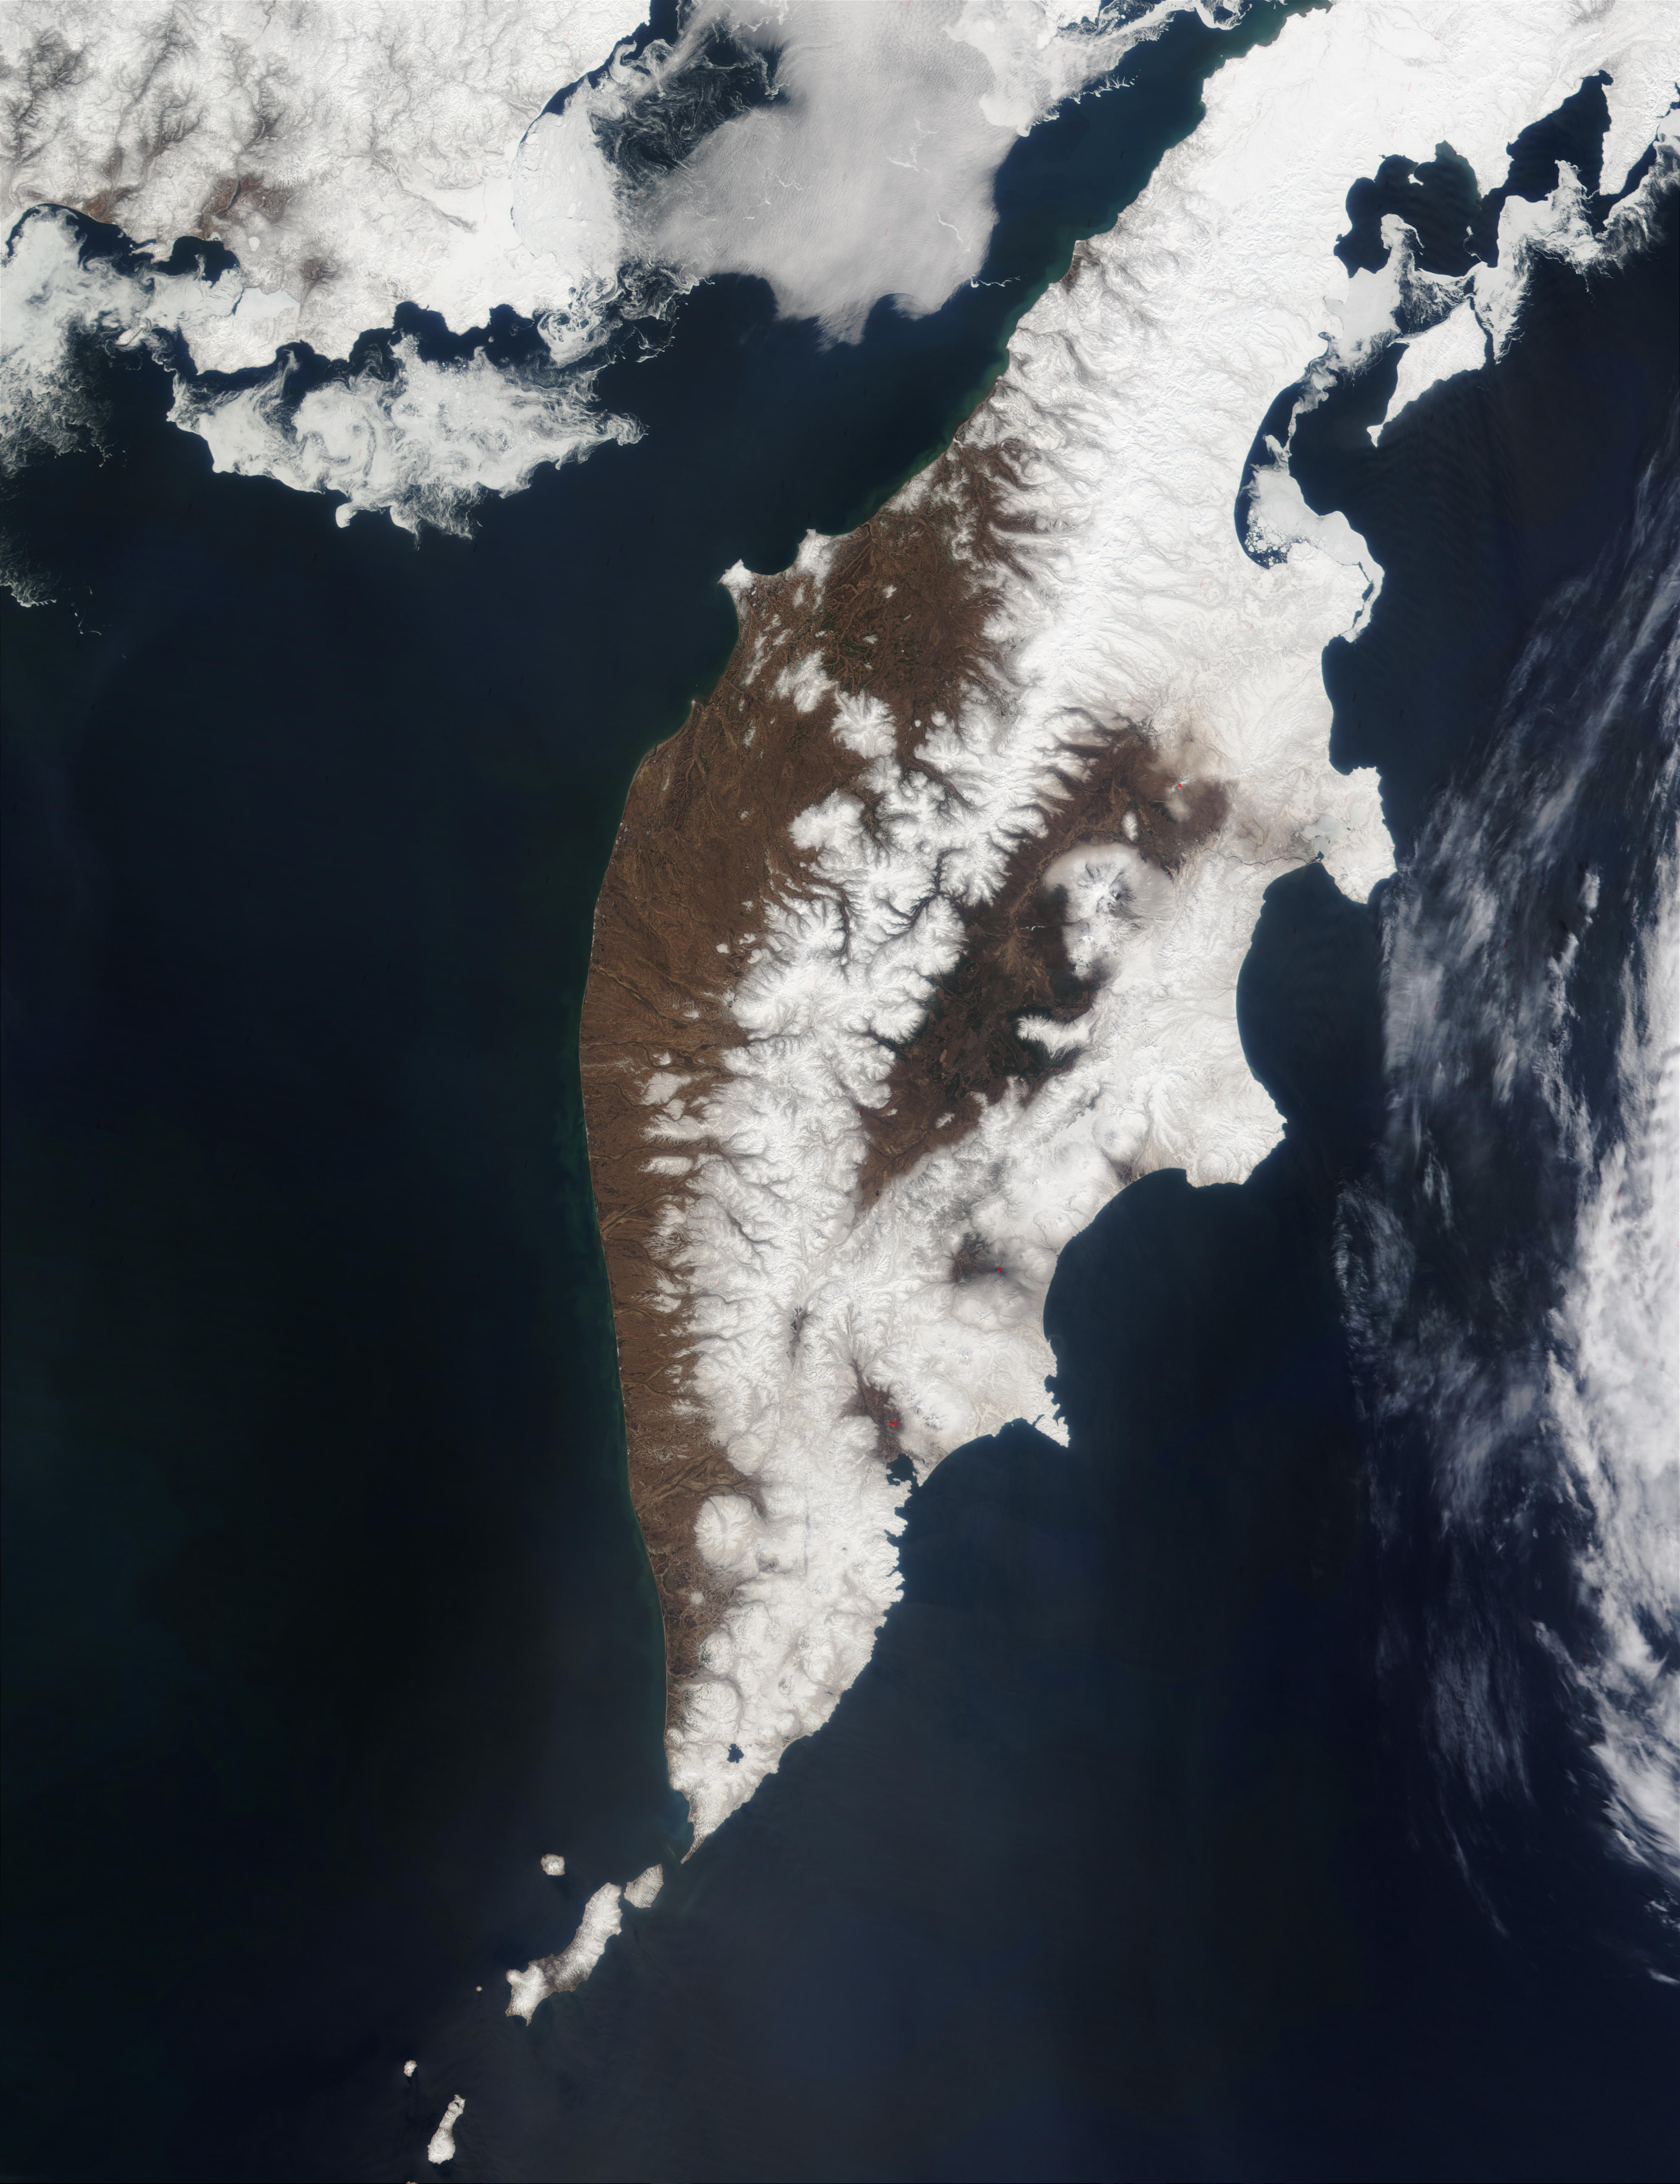 Kamchatka Peninsula, Russia - related image preview